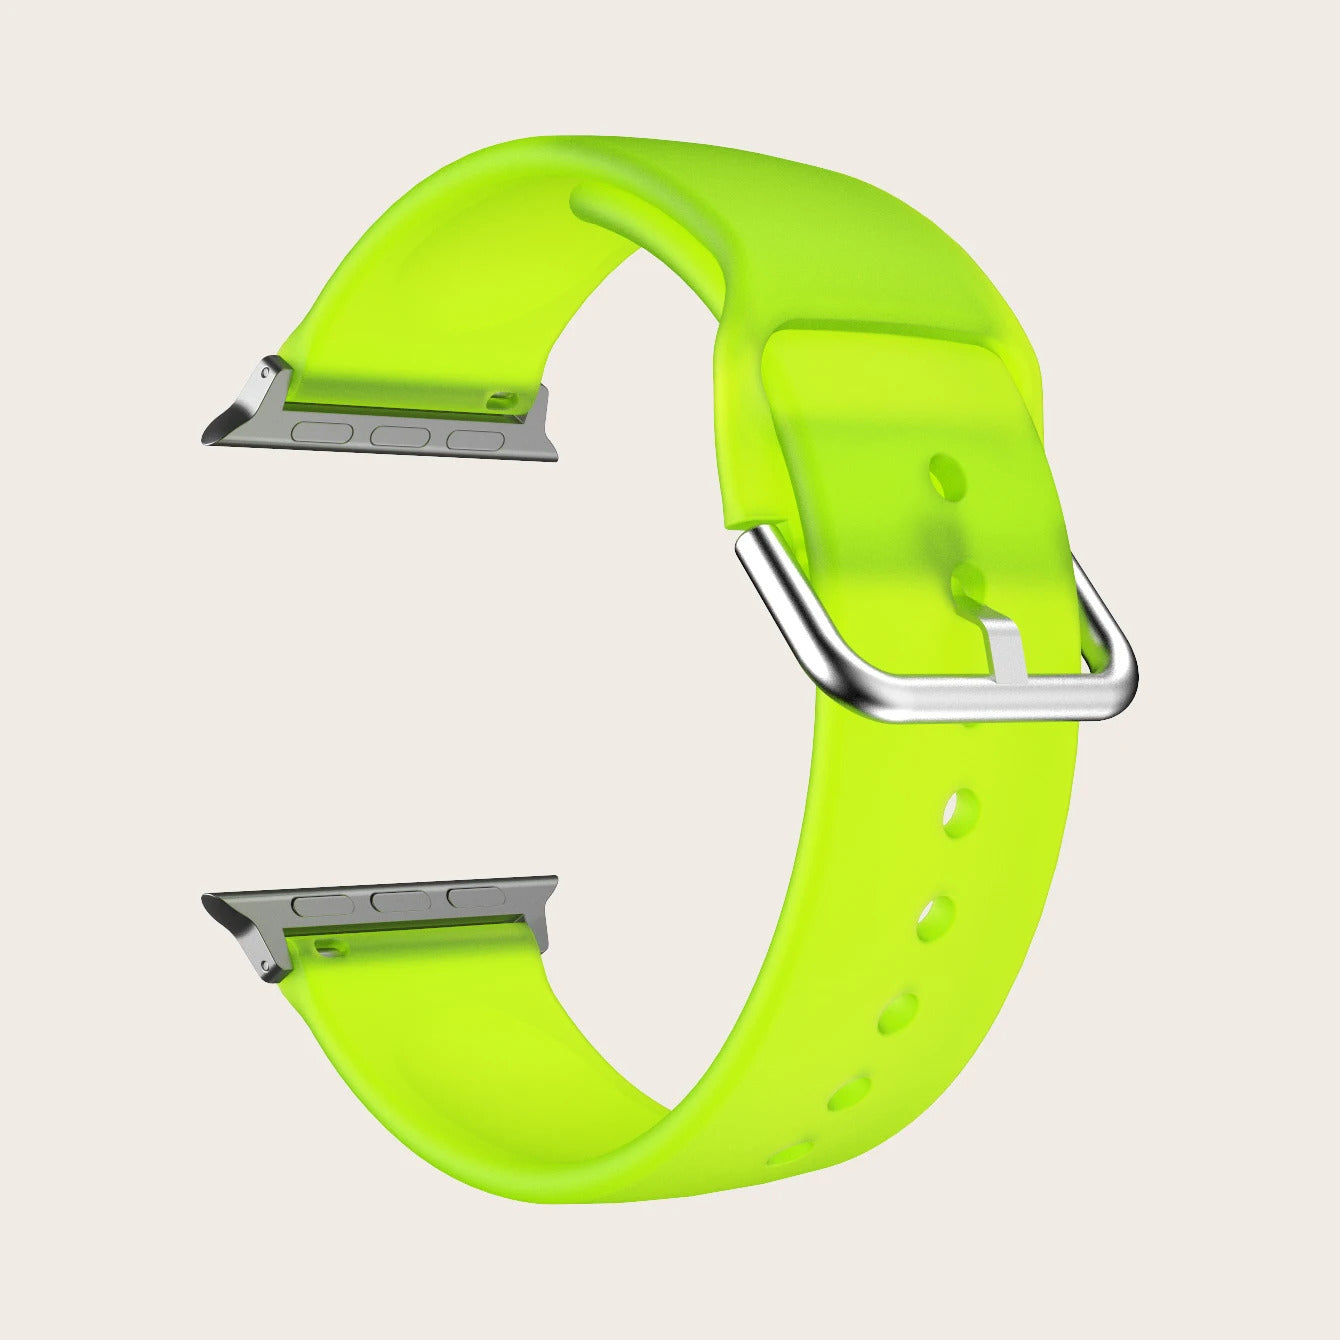 Neon Green Apple Watch Band Separated From Apple Watch